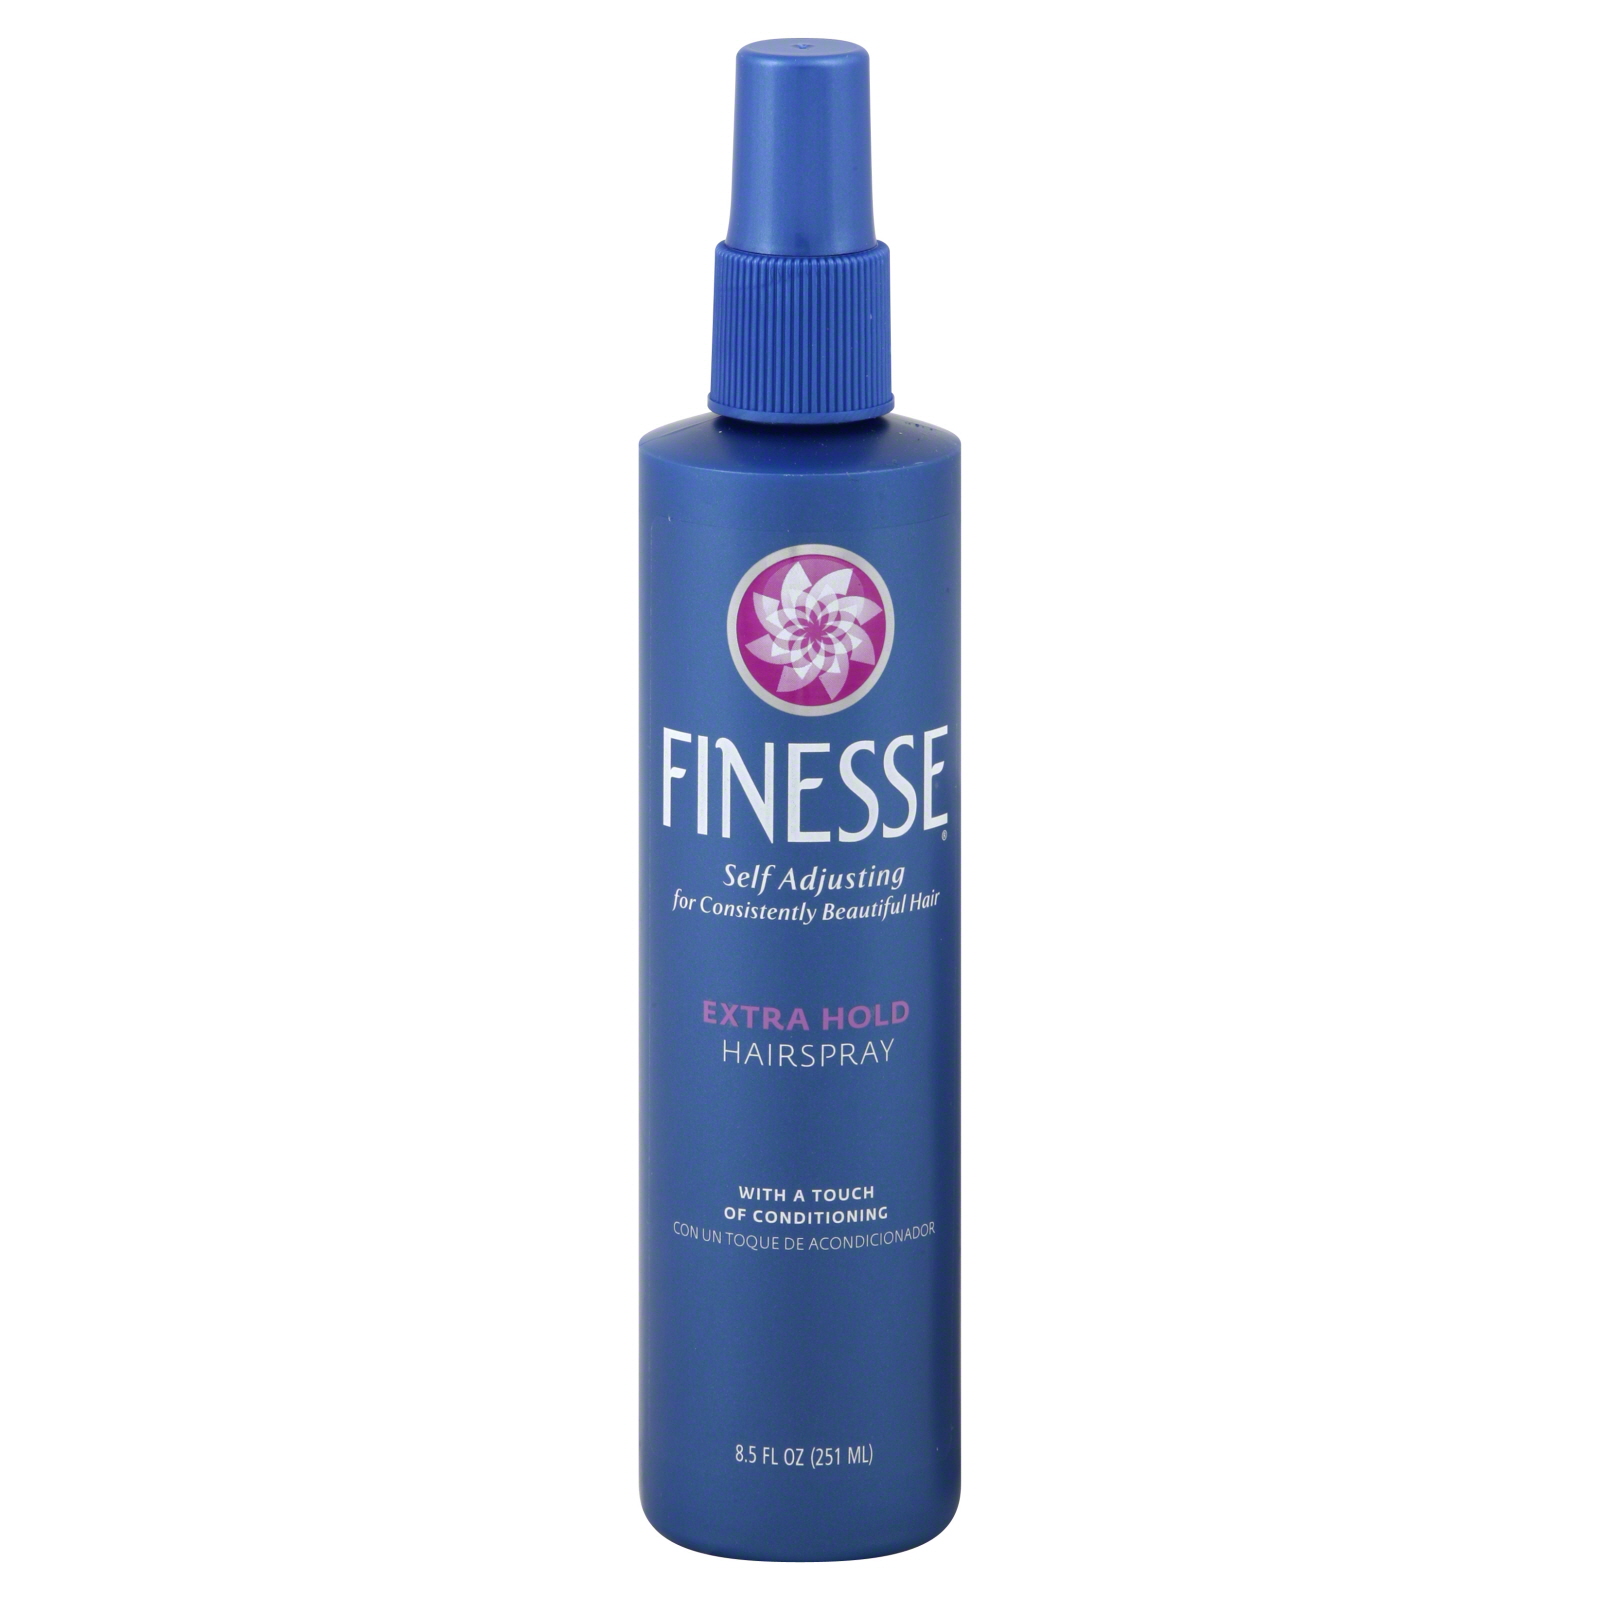 Finesse Hairspray, Extra Hold, 8.5 oz (251 ml)